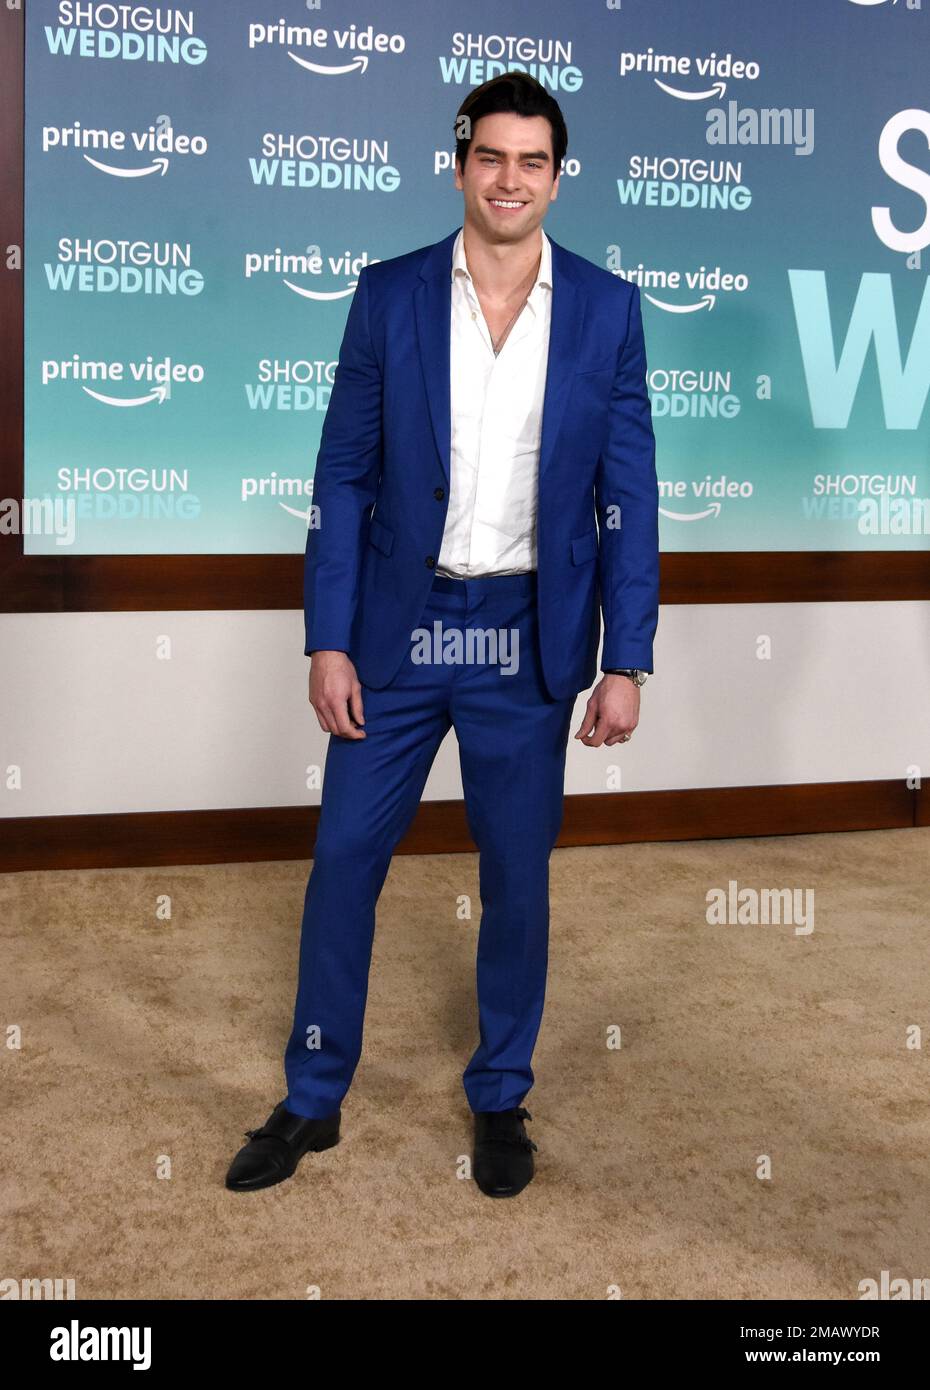 Hollywood, California, USA 18th January 2023 Actor Pierson Fode attends Prime Video's 'Shotgun Wedding' Premiere at TCL Chinese Theatre on January 18, 2023 in Hollywood, California, USA. Photo by Barry King/Alamy Stock Photo Stock Photo